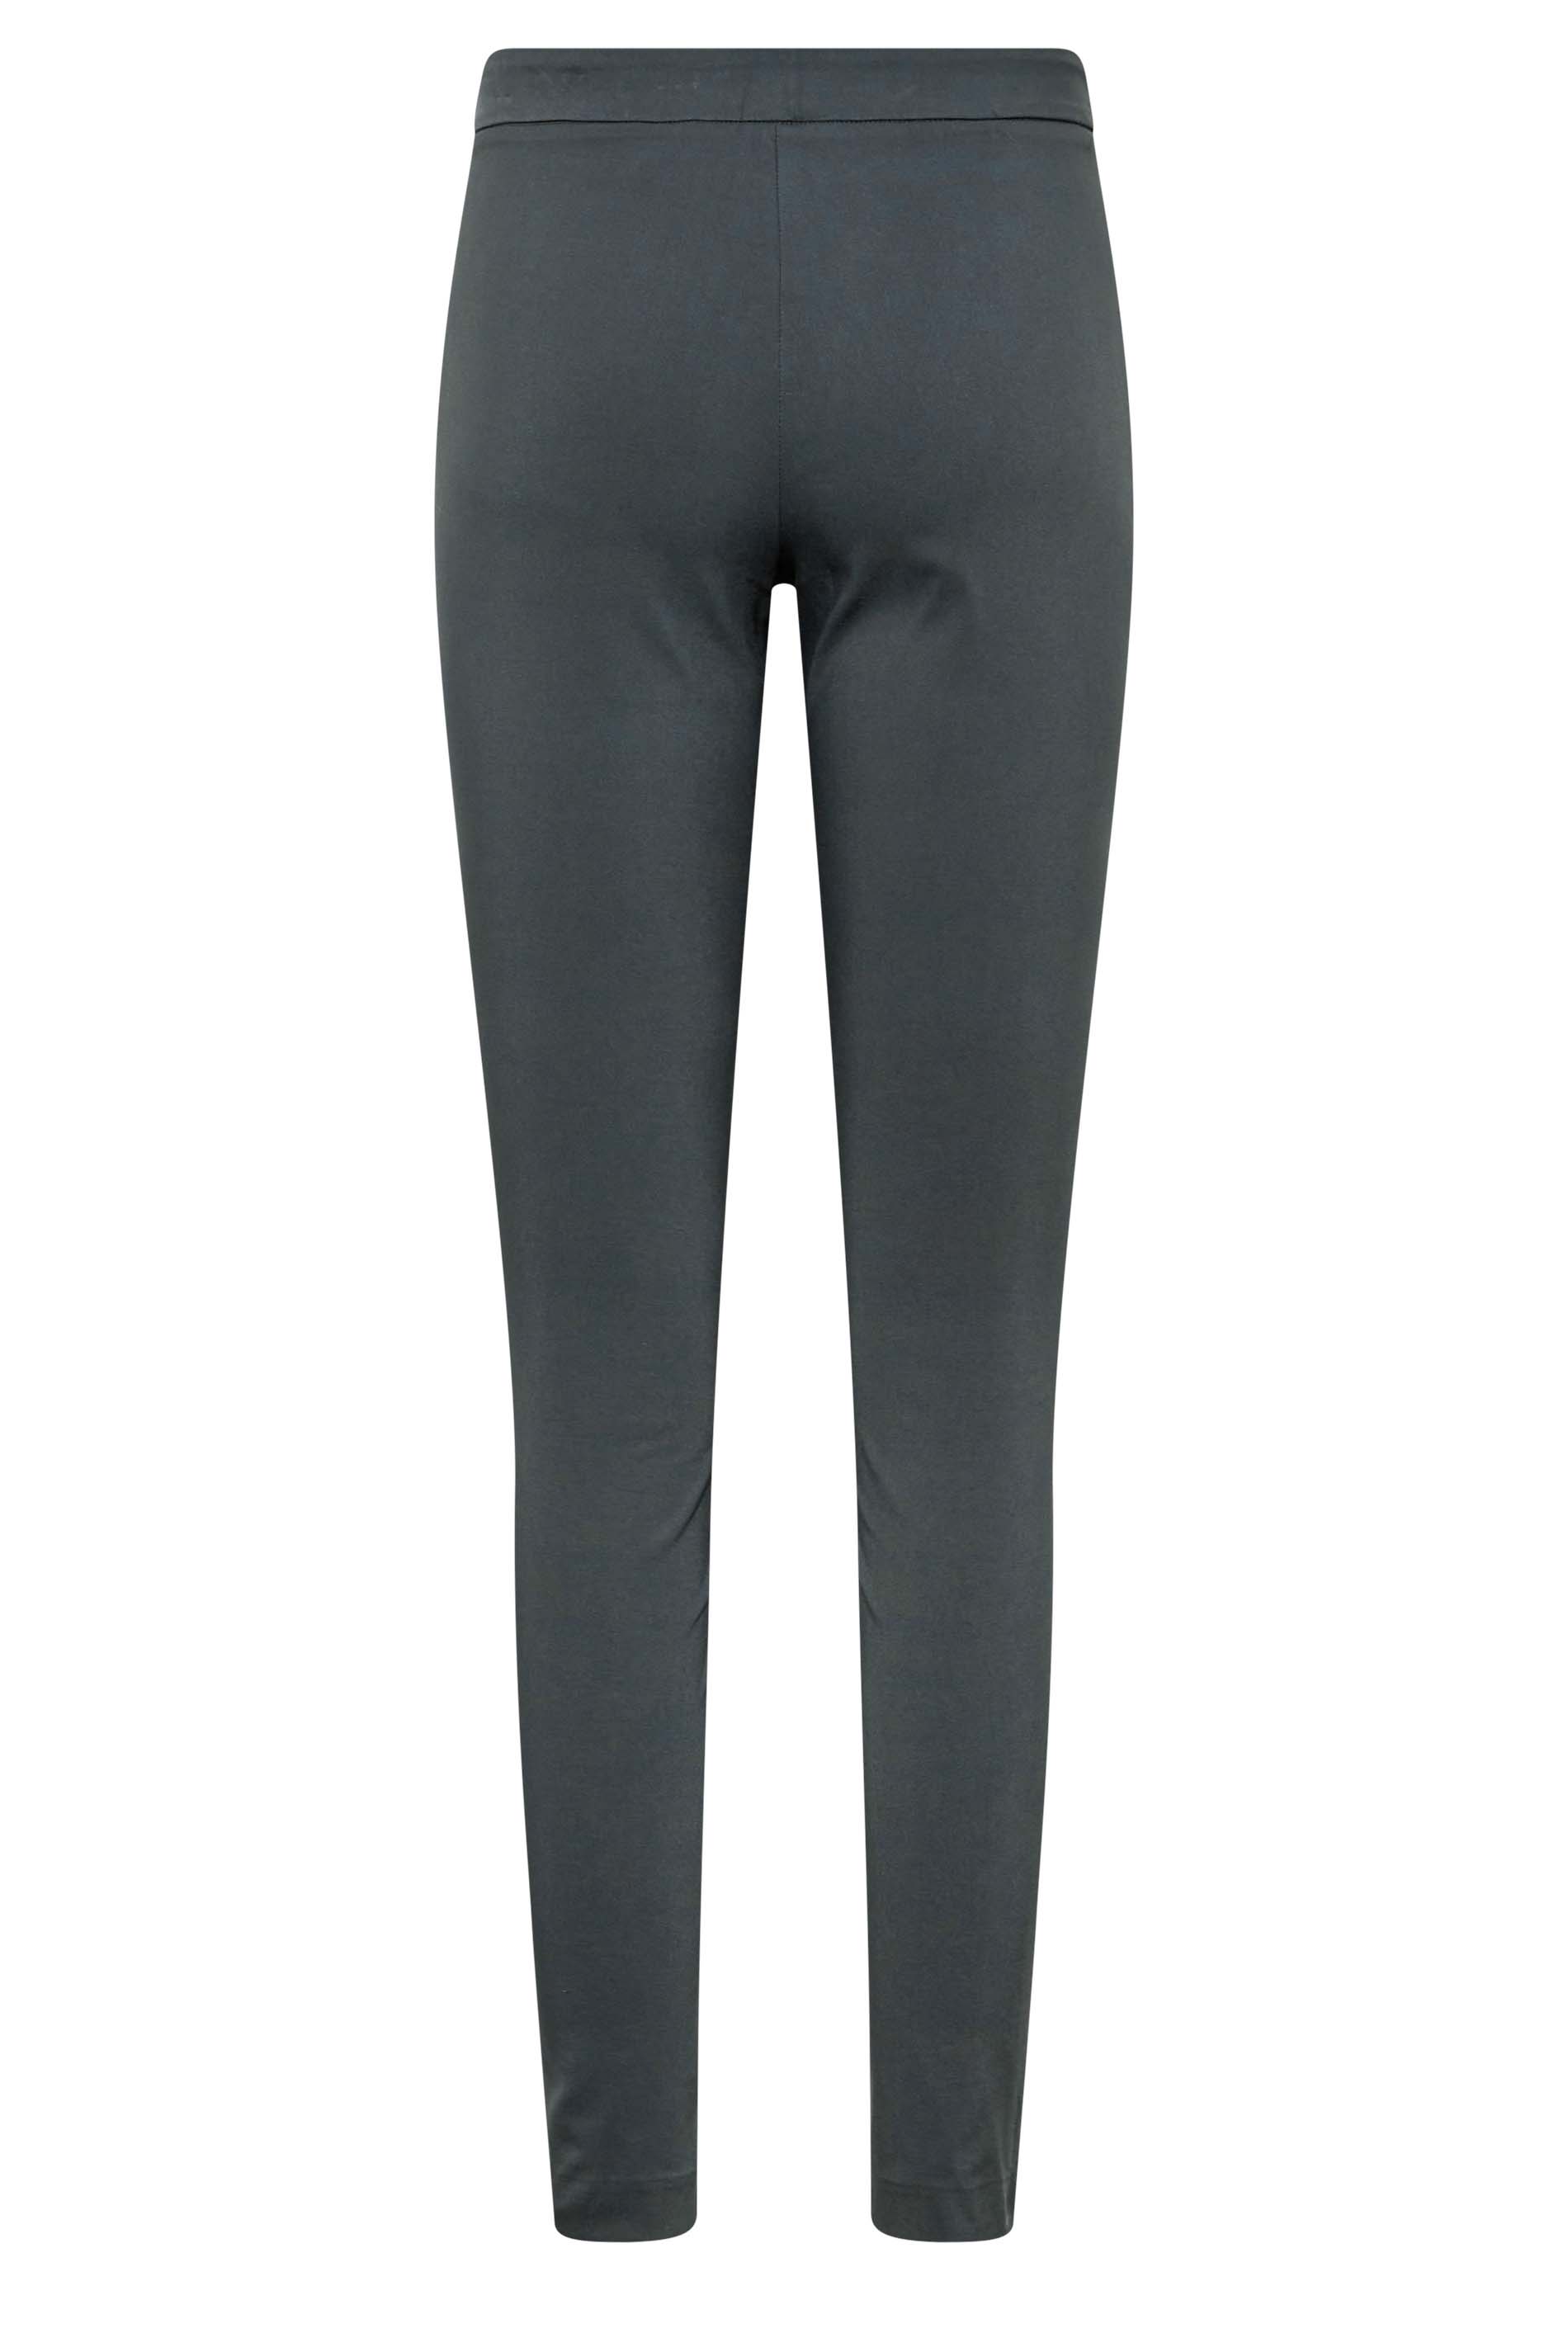 French Connection Street Skinny Trousers, Utility Blue at John Lewis &  Partners